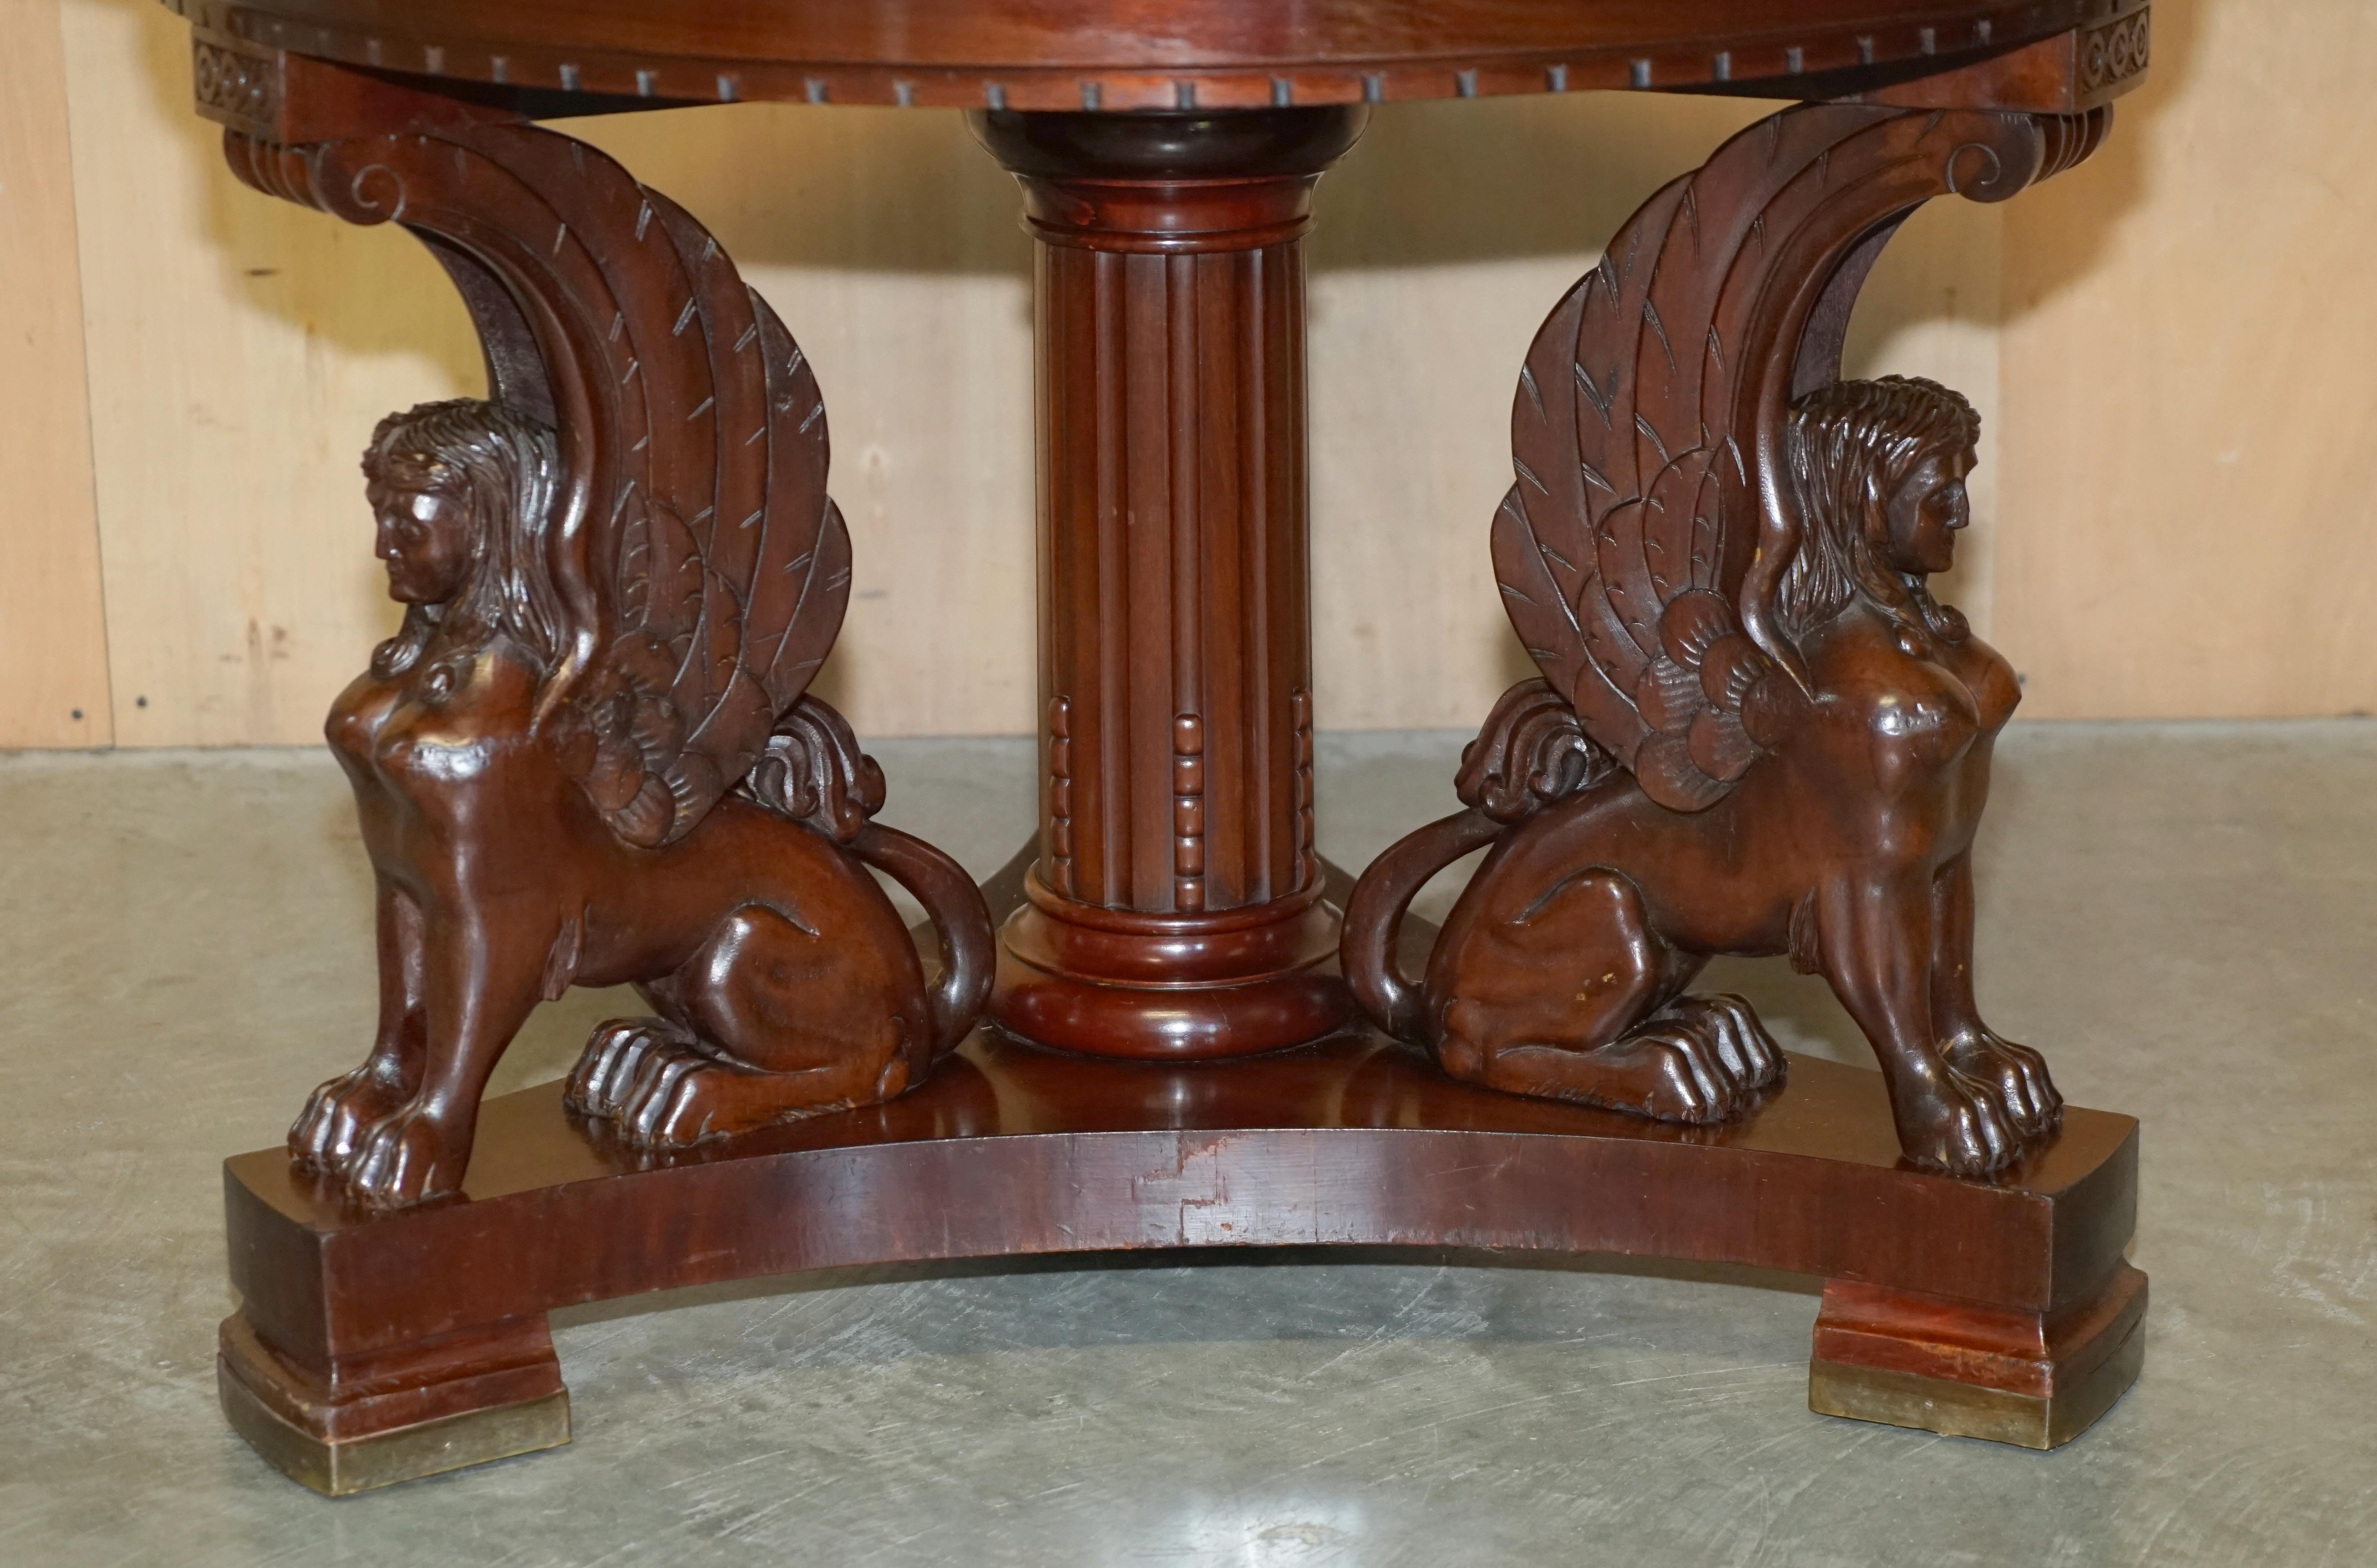 Fine Antique French Neoclassical Hardwood Centre Table with Sphinx Pillared Base For Sale 1